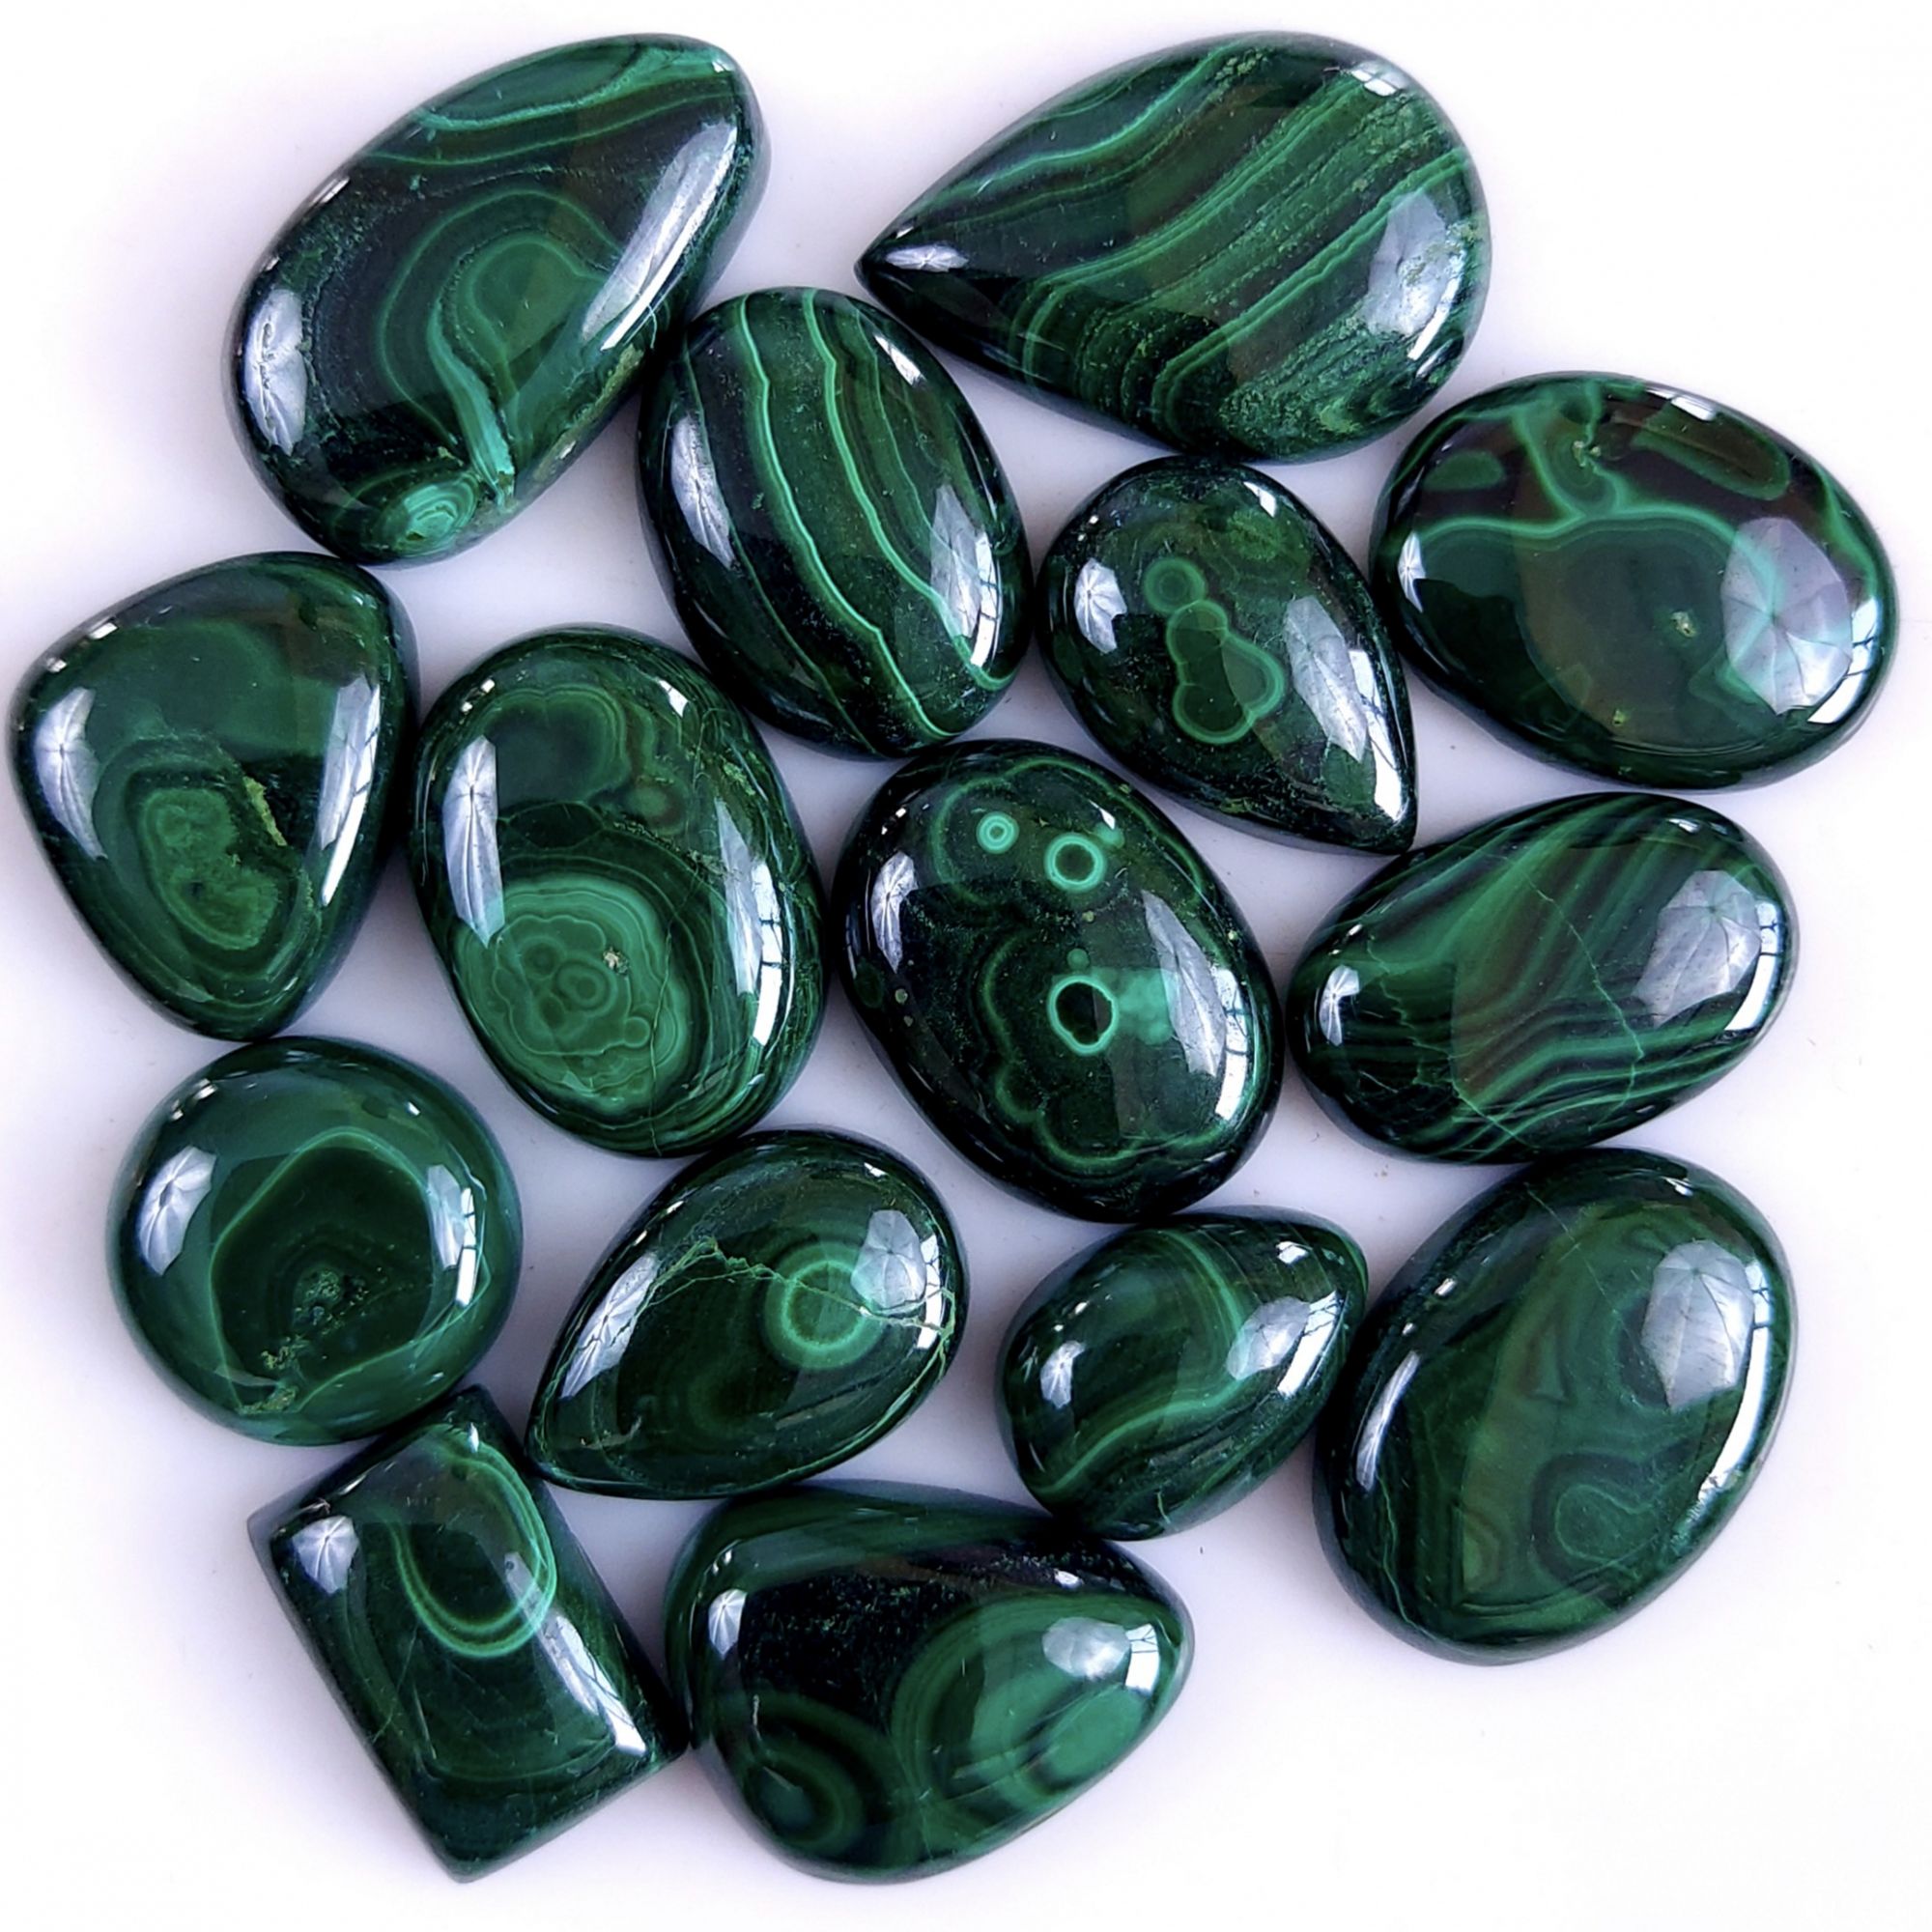 15Pcs 315Cts Natural Green Malachite Flat Back Loose Cabochon Gemstone For Handmade Jewelry Making and Craft Supplies 23x12 13x9mm#9340